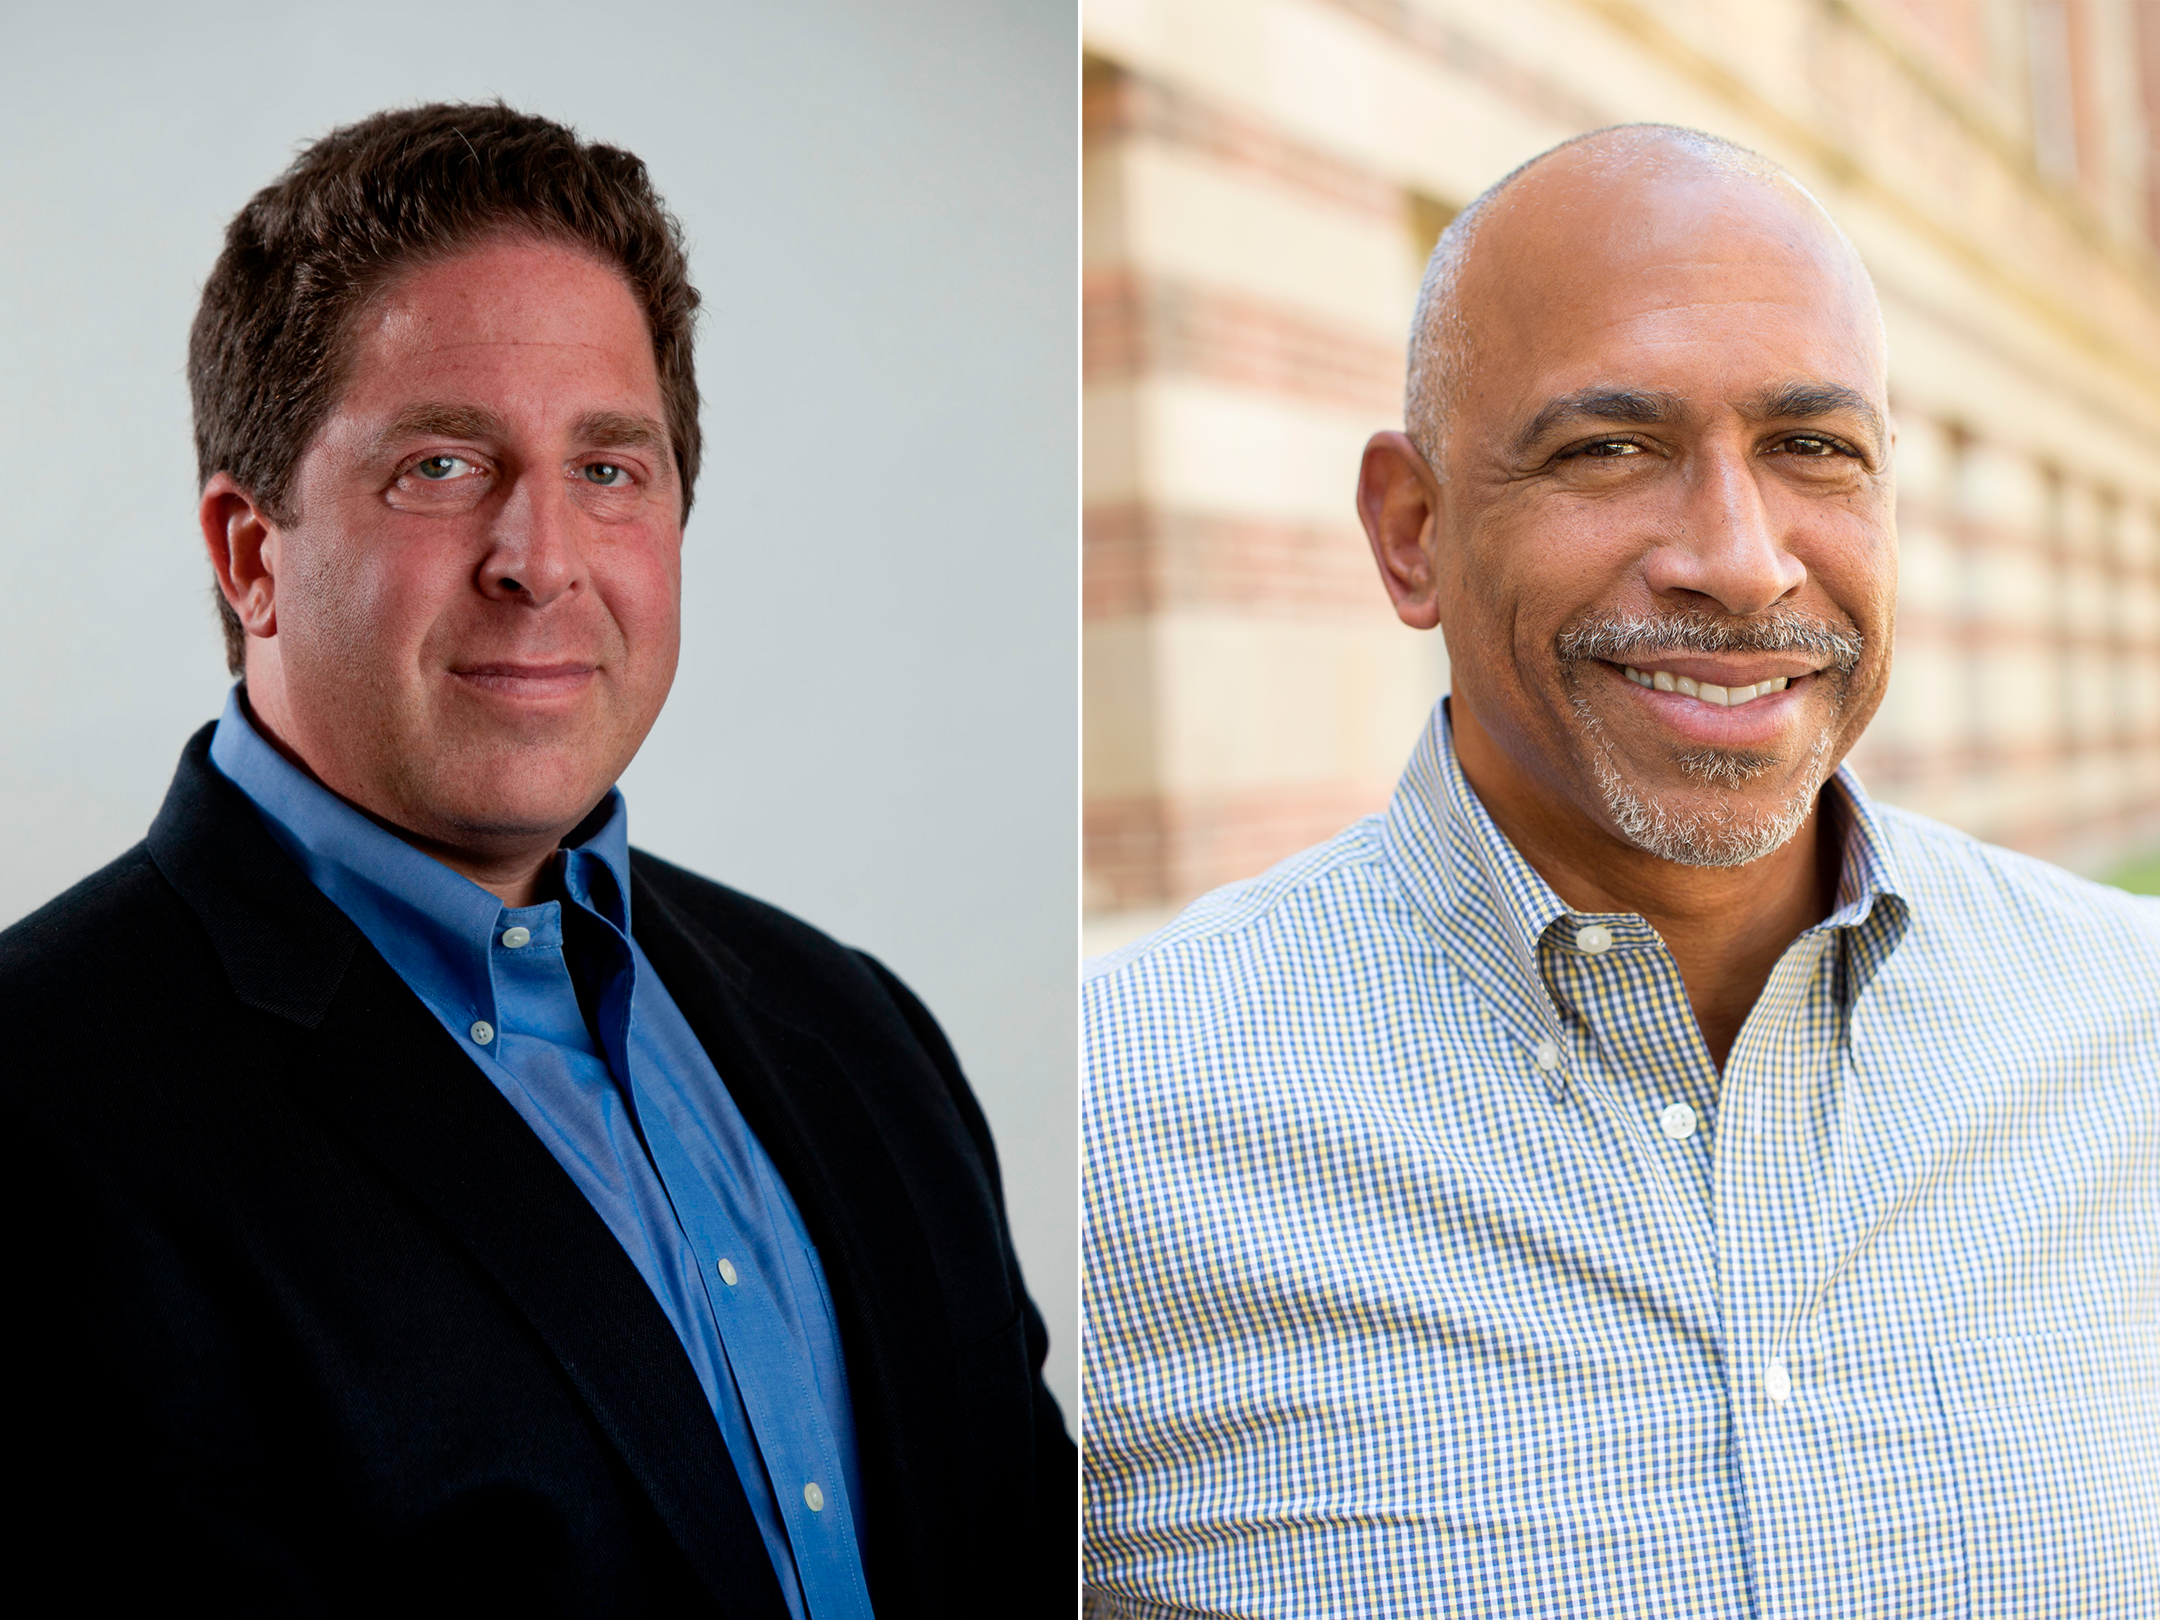 Two headshots, side by side, of authors Frederick Hess and Pedro Noguera